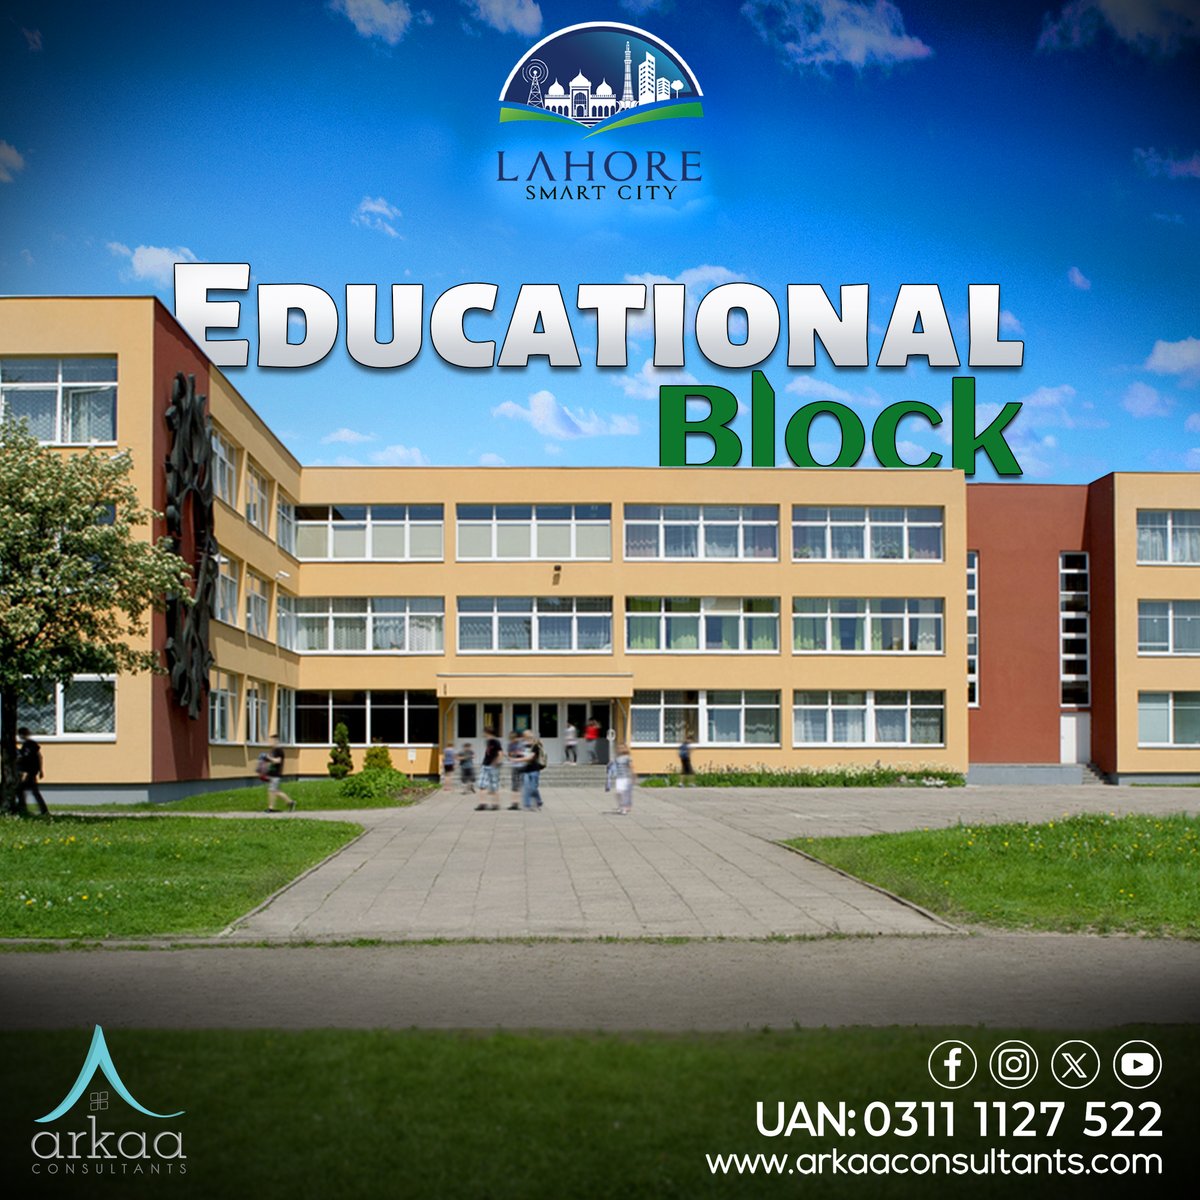 Discover a hub of learning excellence at Lahore Smart City's Educational Block. Unlock boundless possibilities as minds are nurtured for a brighter future.

#Arkaa #lahoresmartcity #arkaaconsultants #smartinterchange #SmartCities #lscresidential #StayTuned #nextbigthing #lsc